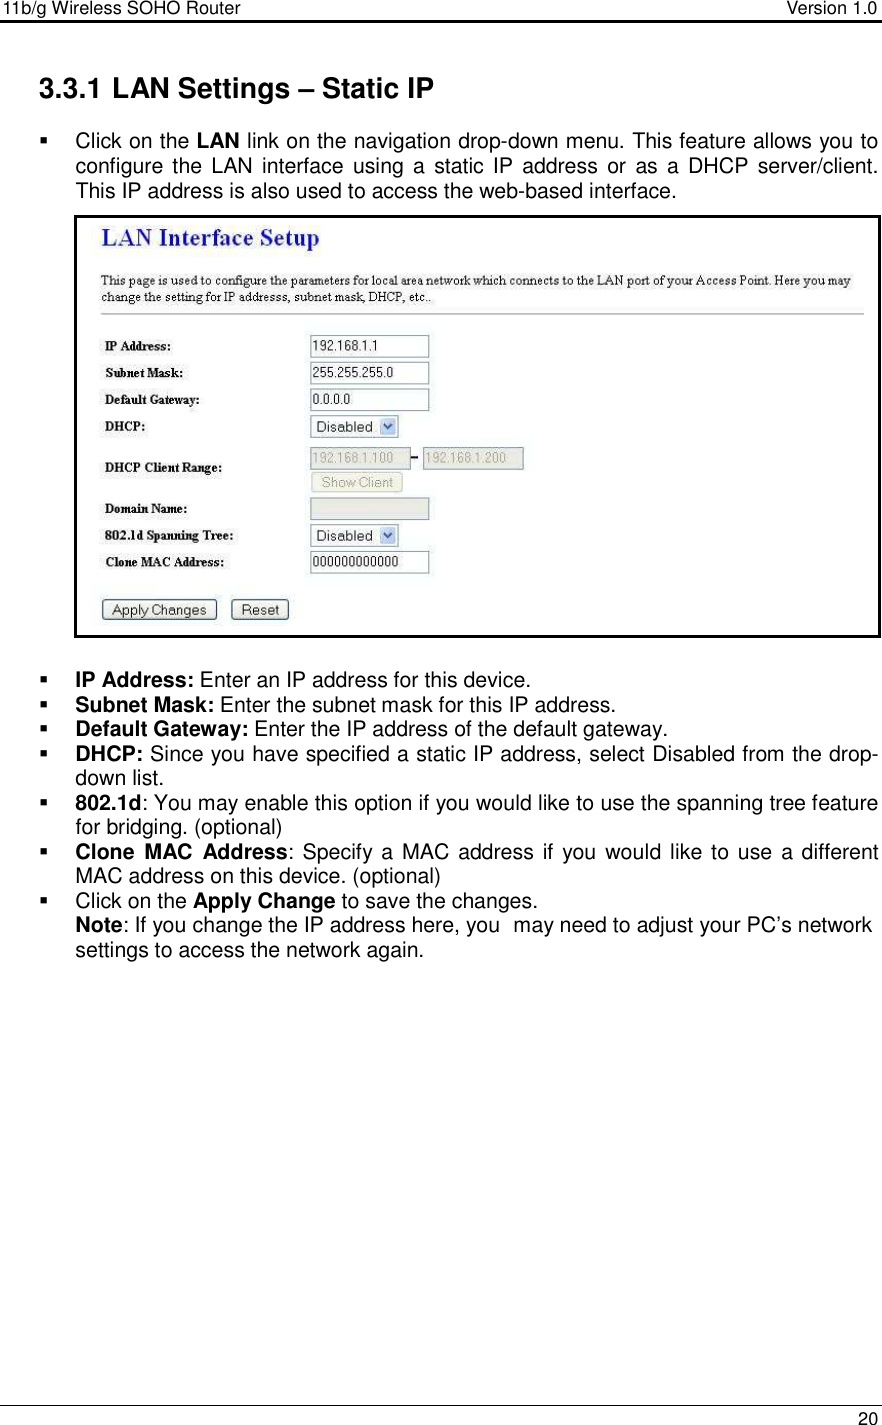 11b/g Wireless SOHO Router                                     Version 1.0    20  3.3.1 LAN Settings – Static IP   Click on the LAN link on the navigation drop-down menu. This feature allows you to configure the LAN  interface  using a  static  IP  address  or as a  DHCP  server/client.  This IP address is also used to access the web-based interface.                      IP Address: Enter an IP address for this device.  Subnet Mask: Enter the subnet mask for this IP address.  Default Gateway: Enter the IP address of the default gateway.   DHCP: Since you have specified a static IP address, select Disabled from the drop-down list.   802.1d: You may enable this option if you would like to use the spanning tree feature for bridging. (optional)  Clone  MAC  Address: Specify a MAC address if you  would  like to use a different MAC address on this device. (optional)   Click on the Apply Change to save the changes.  Note: If you change the IP address here, you  may need to adjust your PC’s network settings to access the network again.               